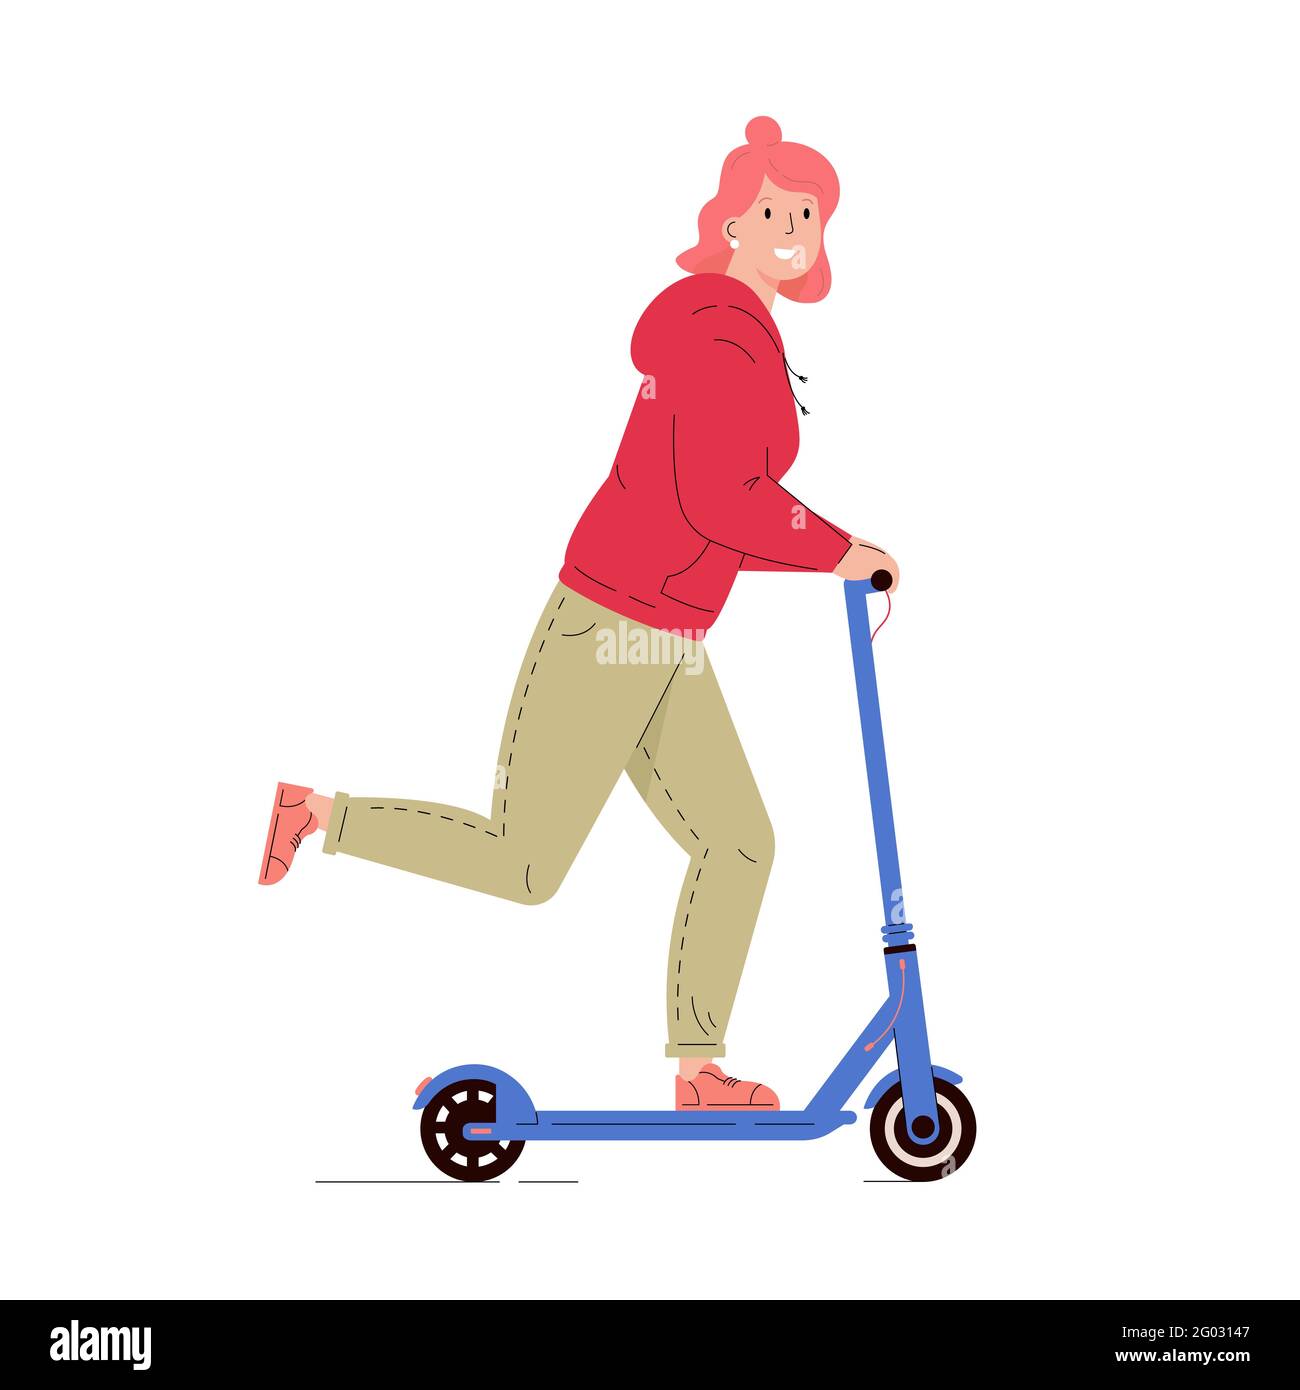 Woman scooter funny Stock Vector Images - Alamy